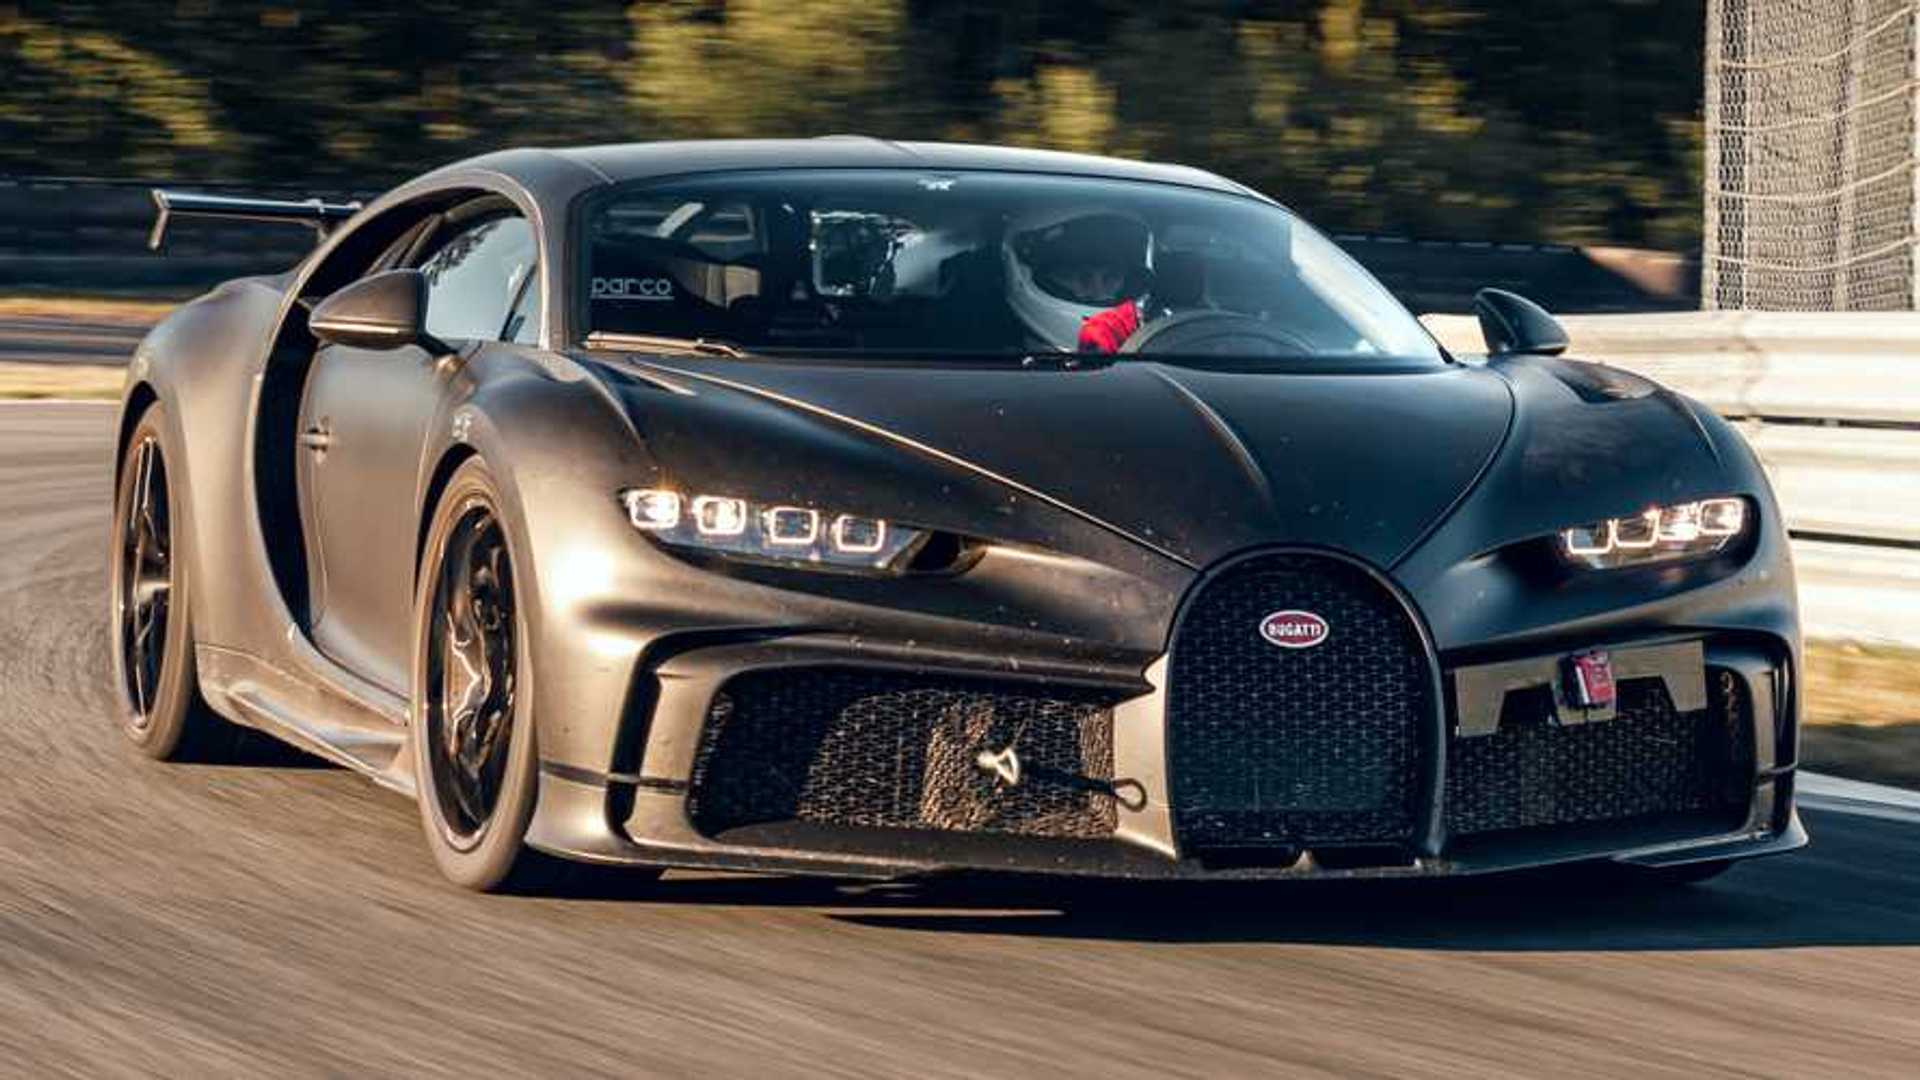 Free download Bugatti Chiron Pur Sport Hits The Track Stunning Image Ensue [1920x1080] for your Desktop, Mobile & Tablet. Explore Bugatti Chiron Wallpaper